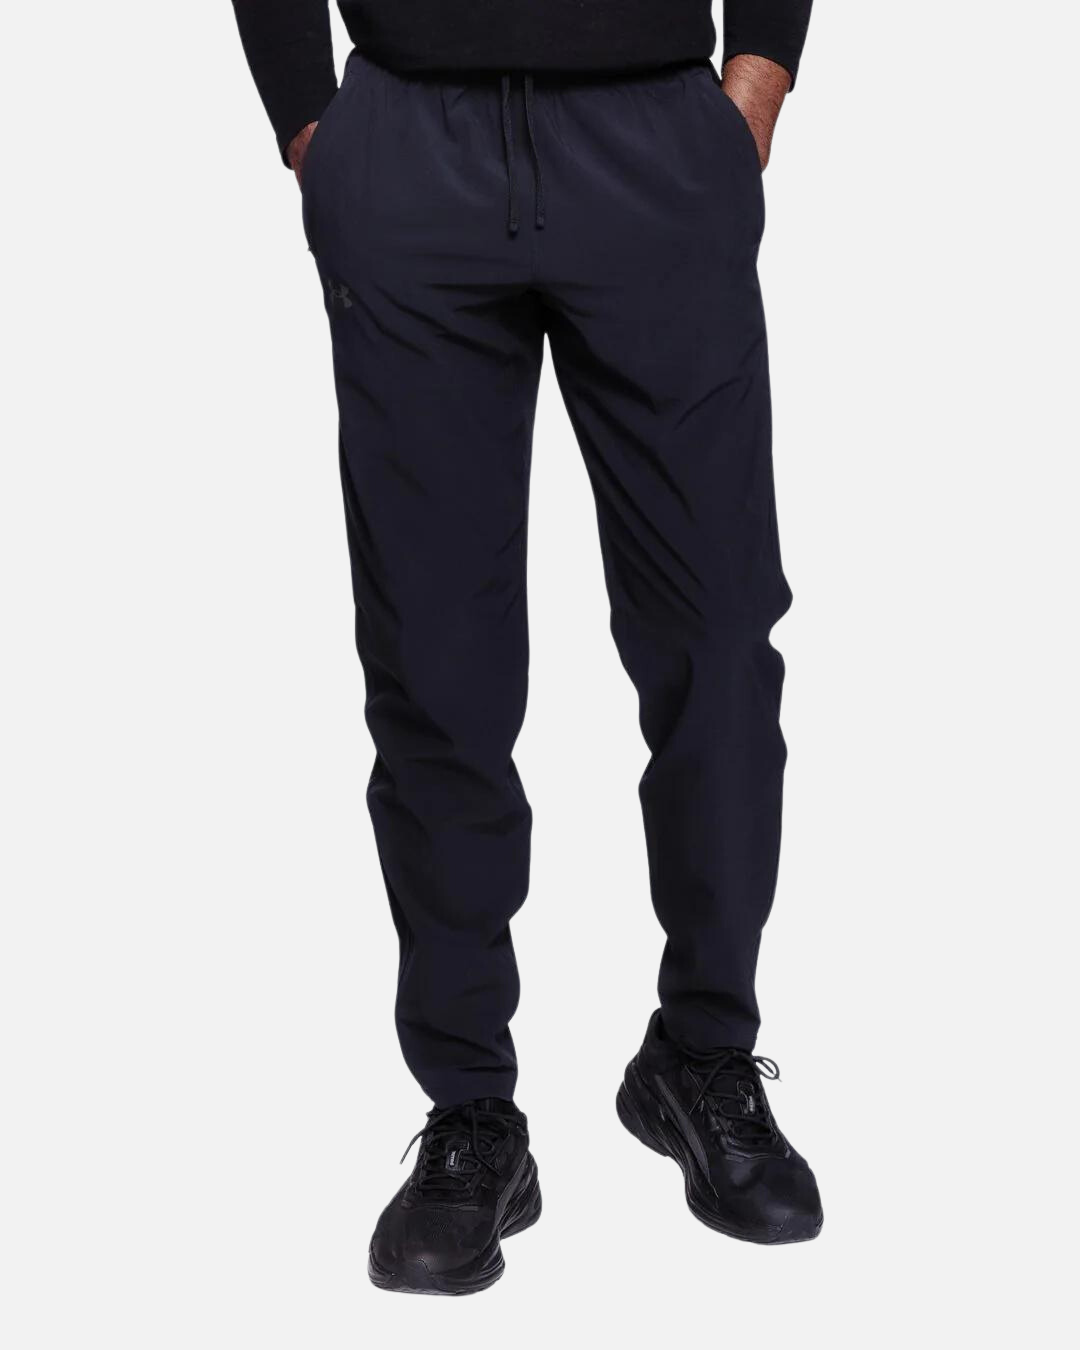 Under Armor OutRun The Storm Pants - Black